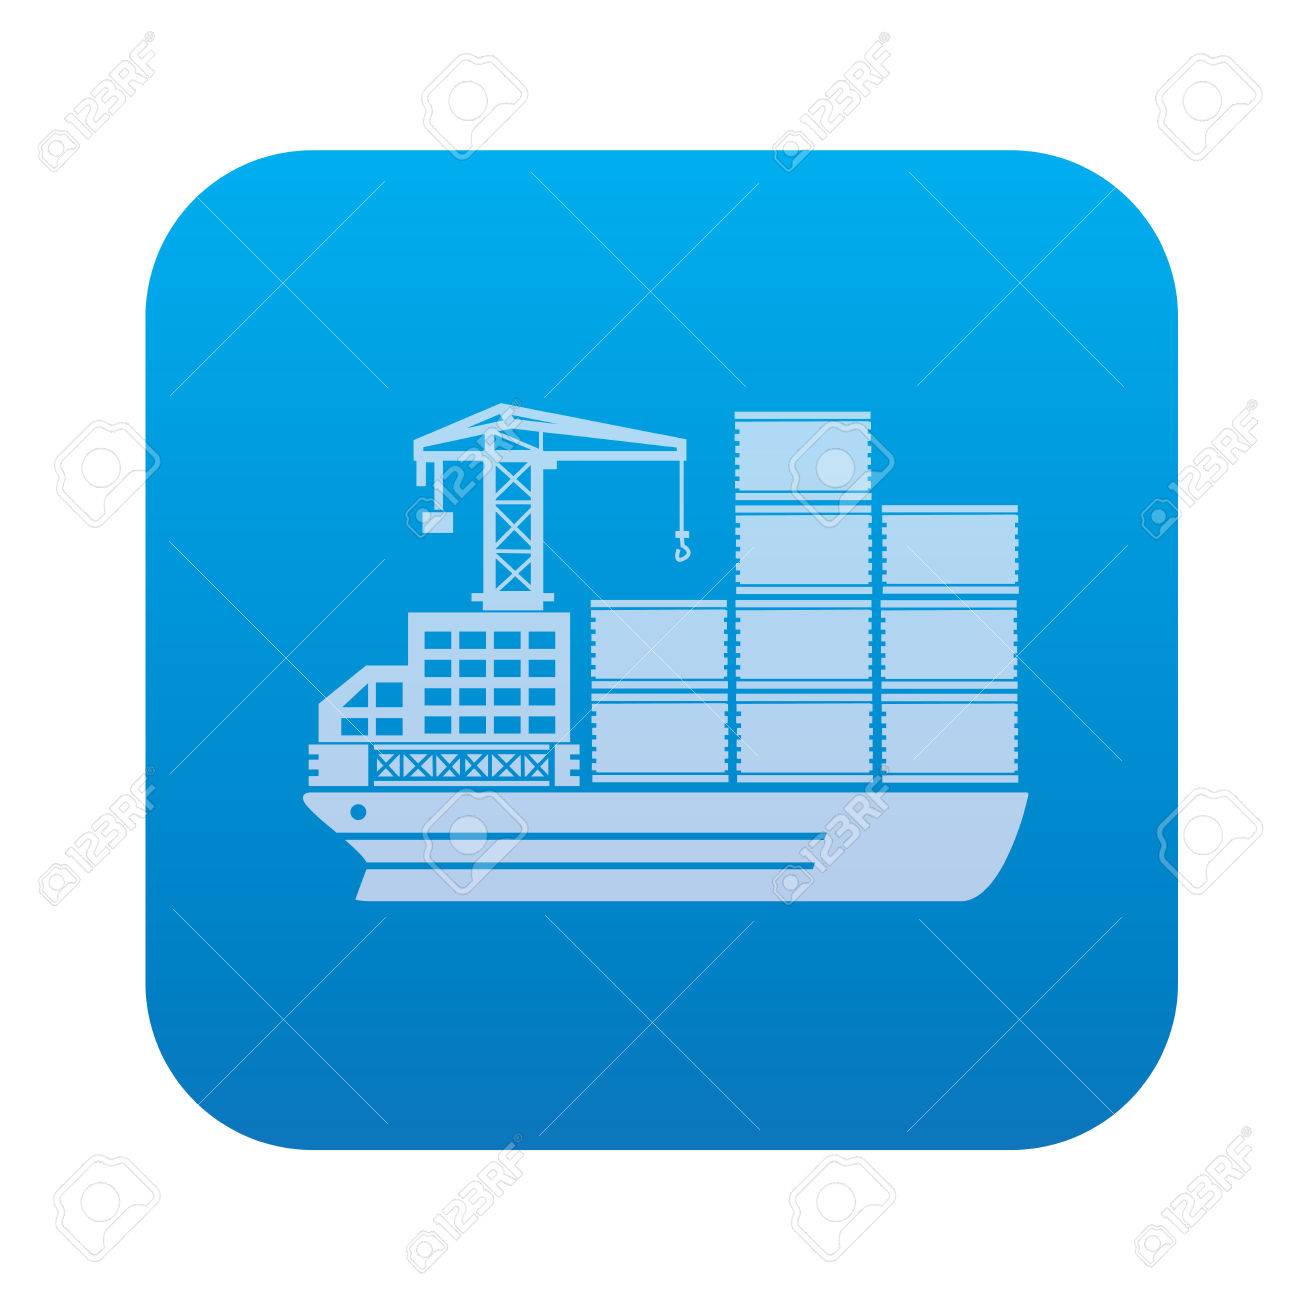 Cargo Shipping Boat Icon On Blue Button Background Clean Vector